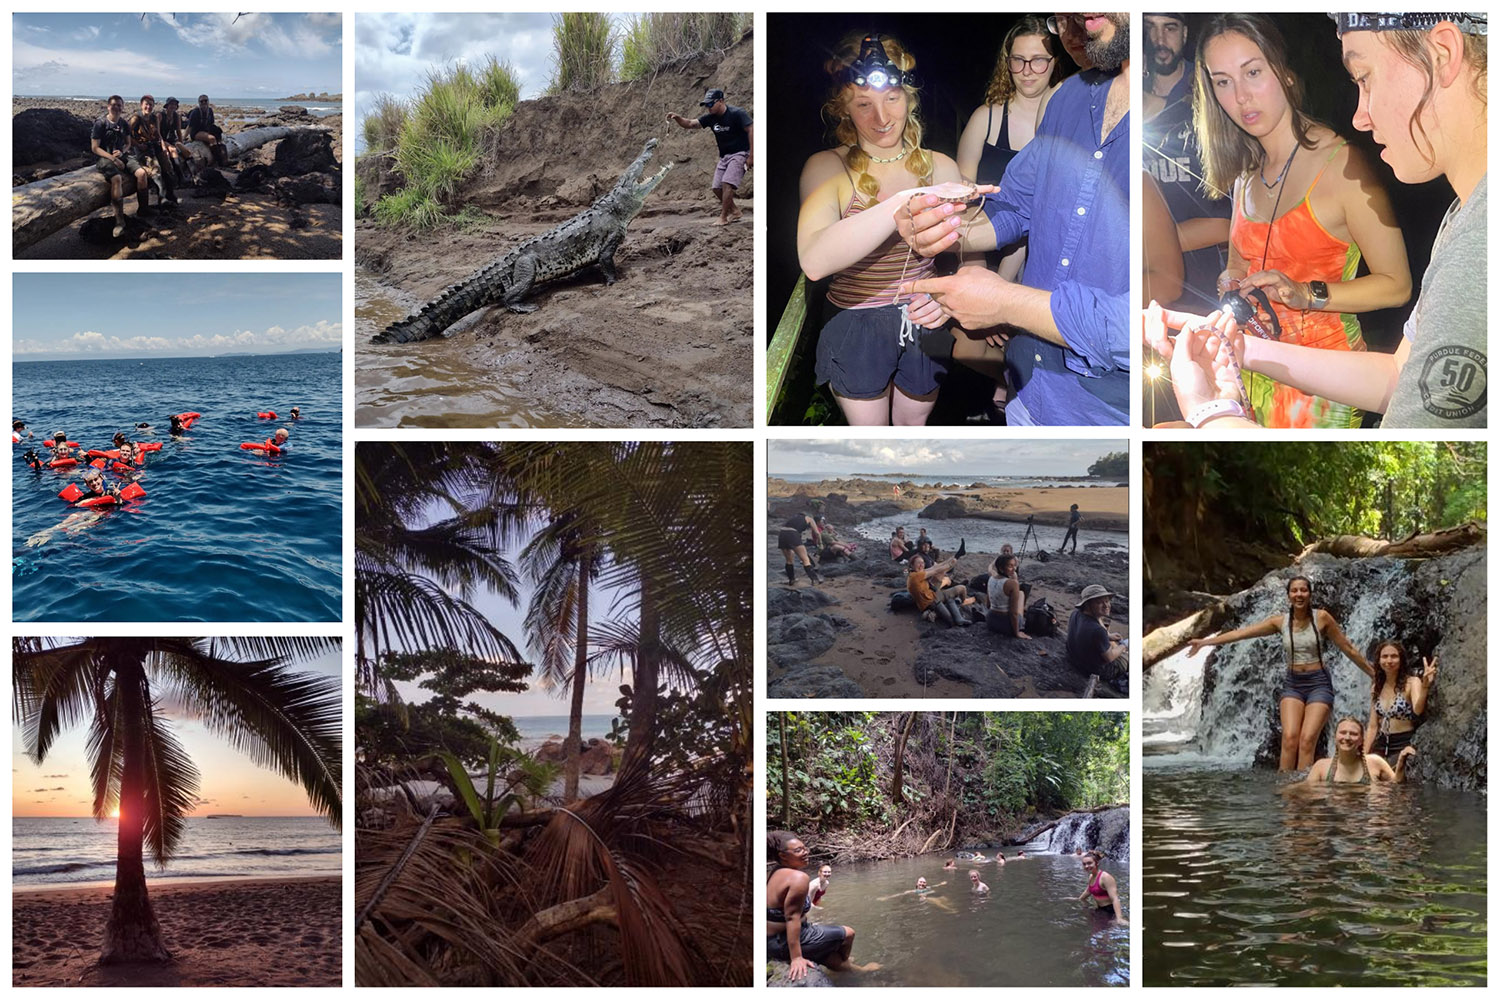 Photos from the beach on the Costa Rica study abroad trip